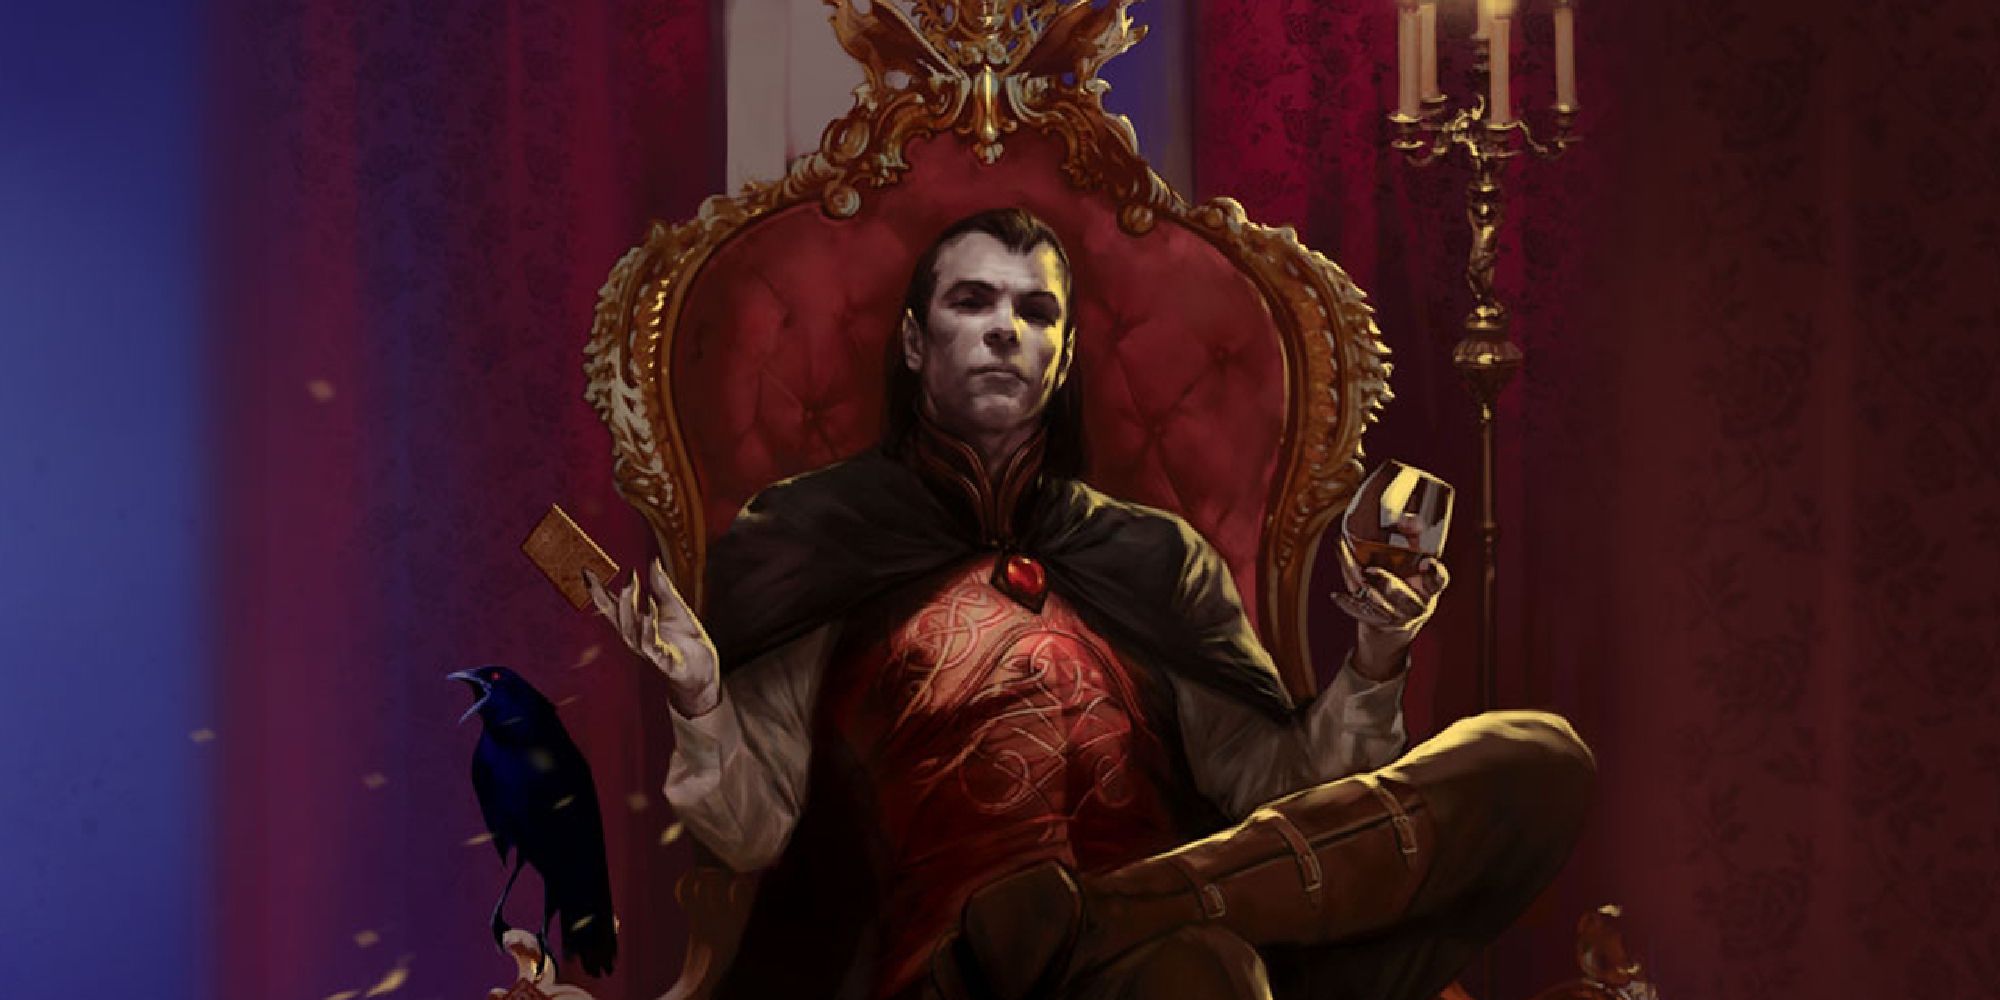 The vampire lord Strahd sits on a throne holding a glass of red liquid on one hand and a tarokka card in the other. 